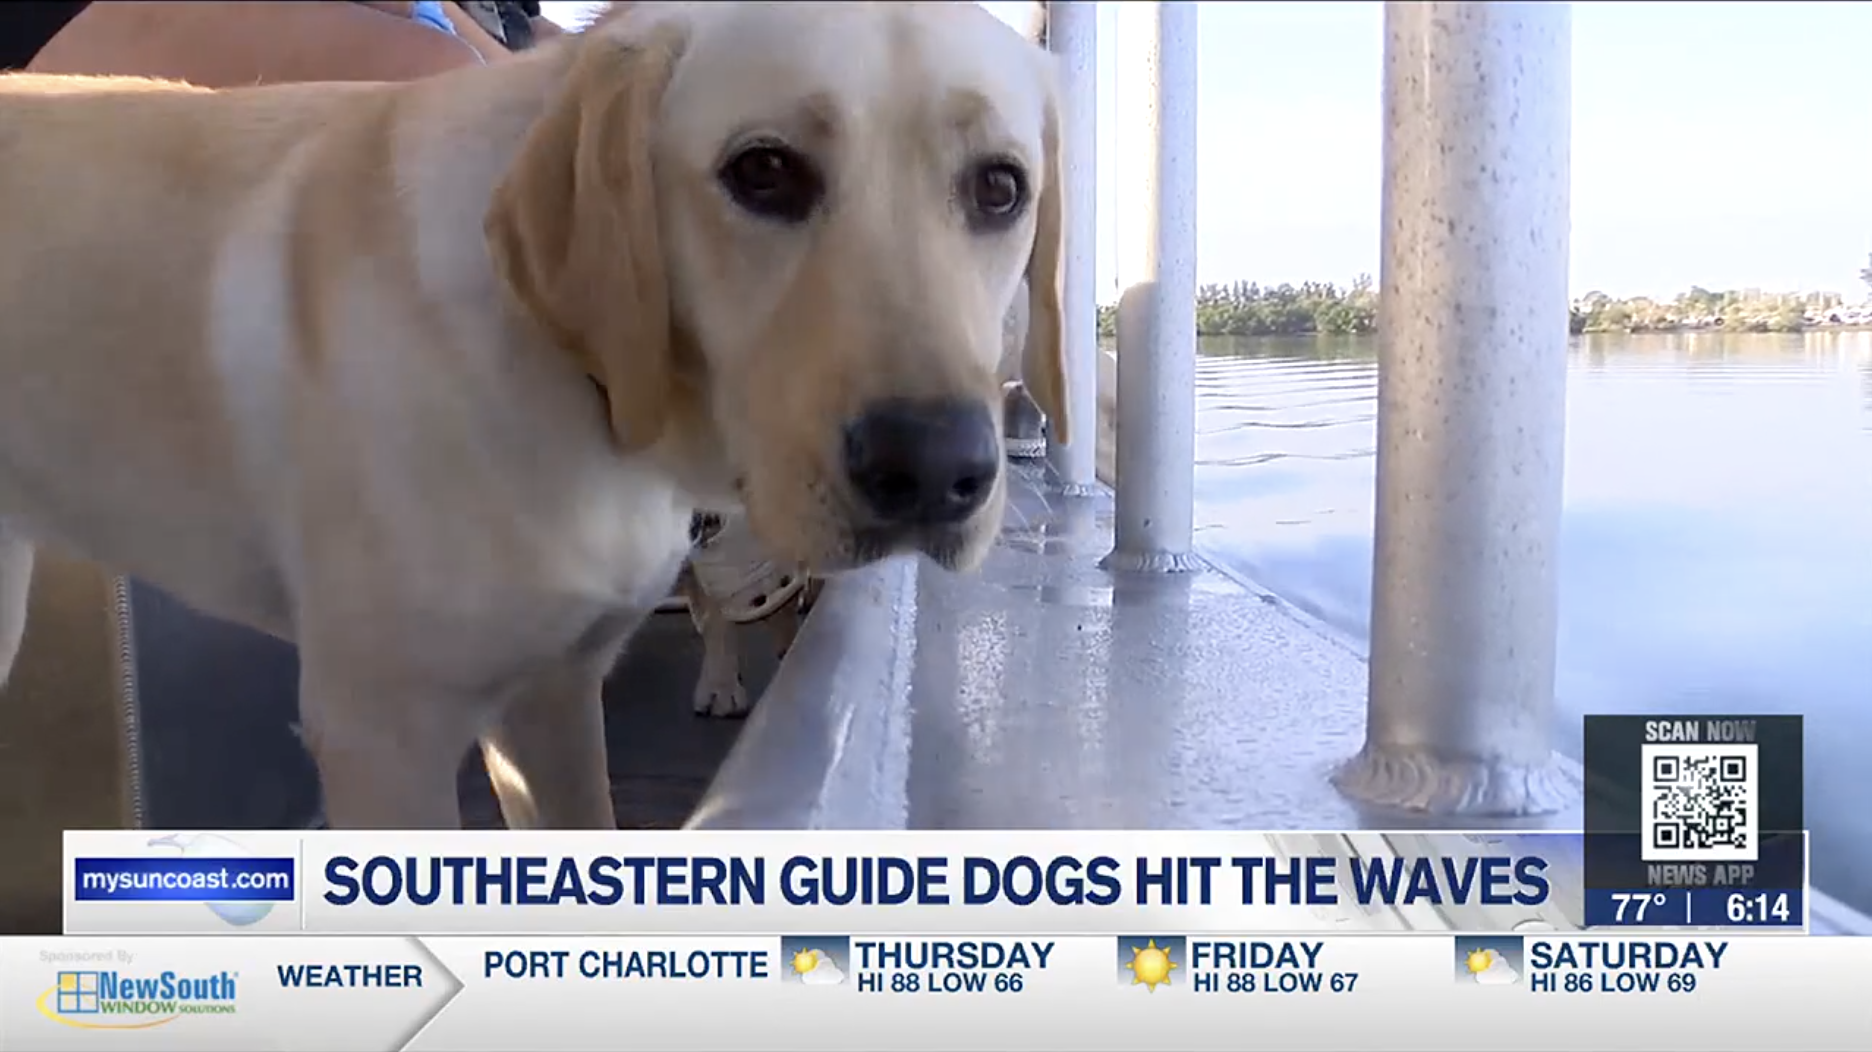 A yellow Labrador stands near the edge of the boat and looks at the camera.